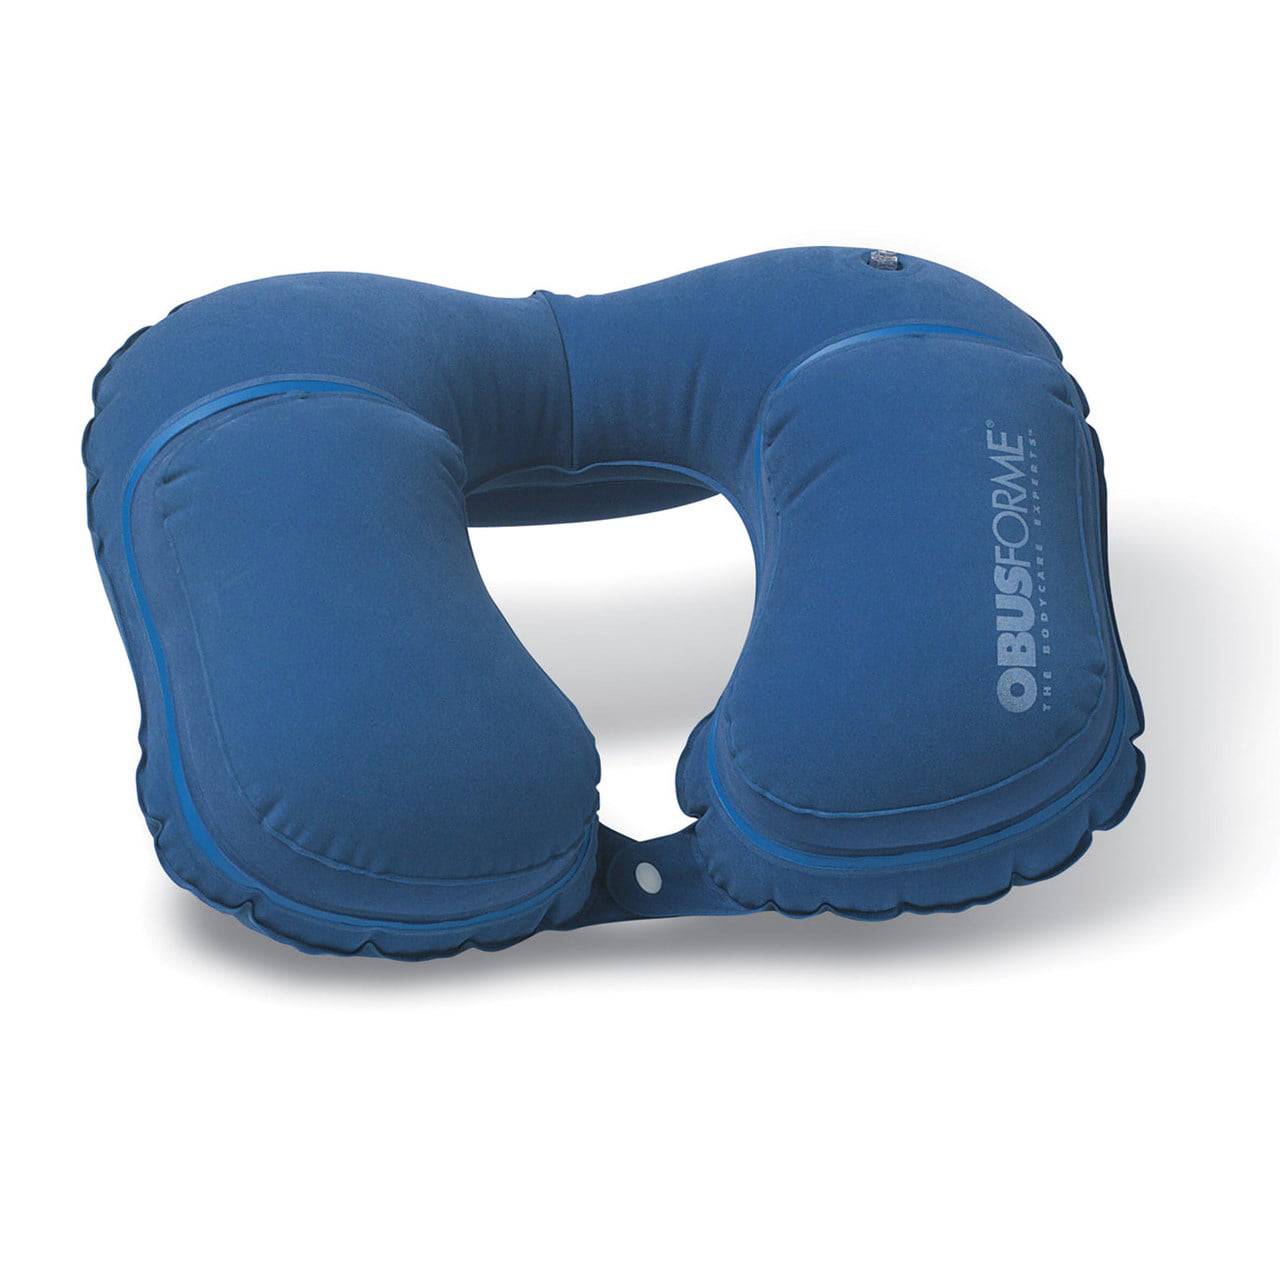 INFLATABLE TRAVEL PILLOW 